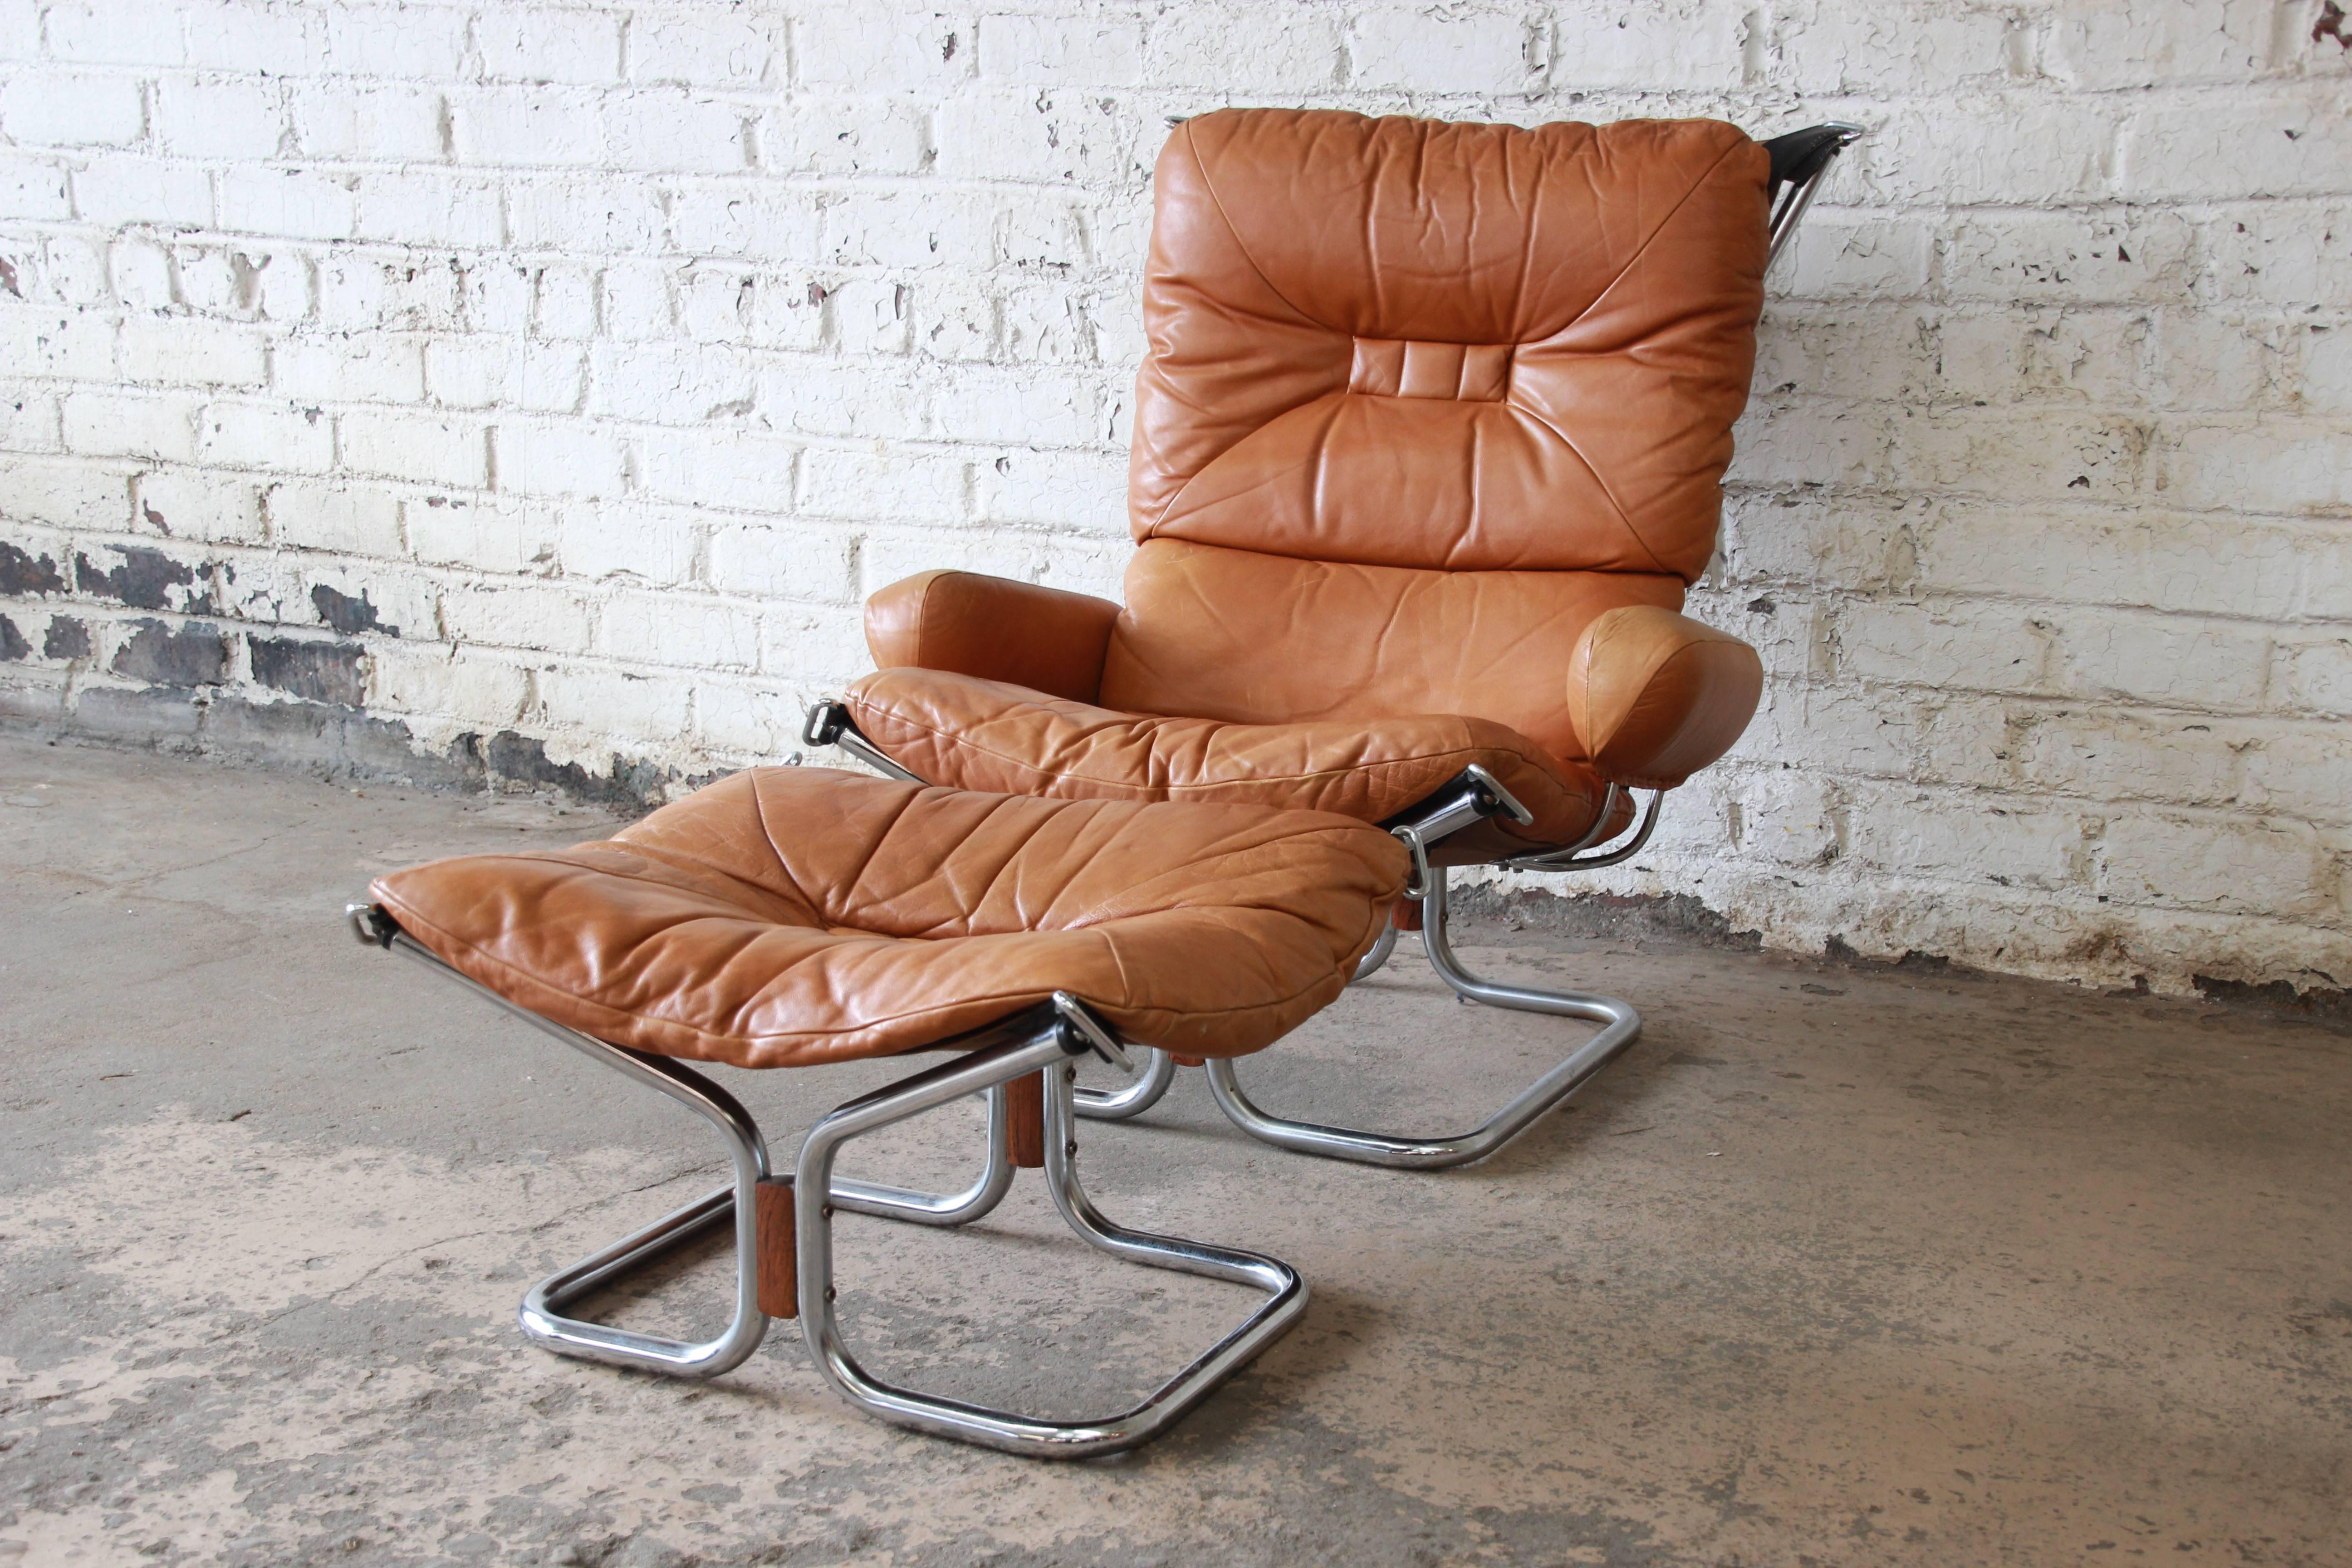 An outstanding Scandinavian Modern brown leather and chrome lounge chair and ottoman designer by Ingmar Relling for Westnofa. The chair features beautifully aged soft brown leather upholstery, a sleek chrome frame, and nice rosewood accents. A very